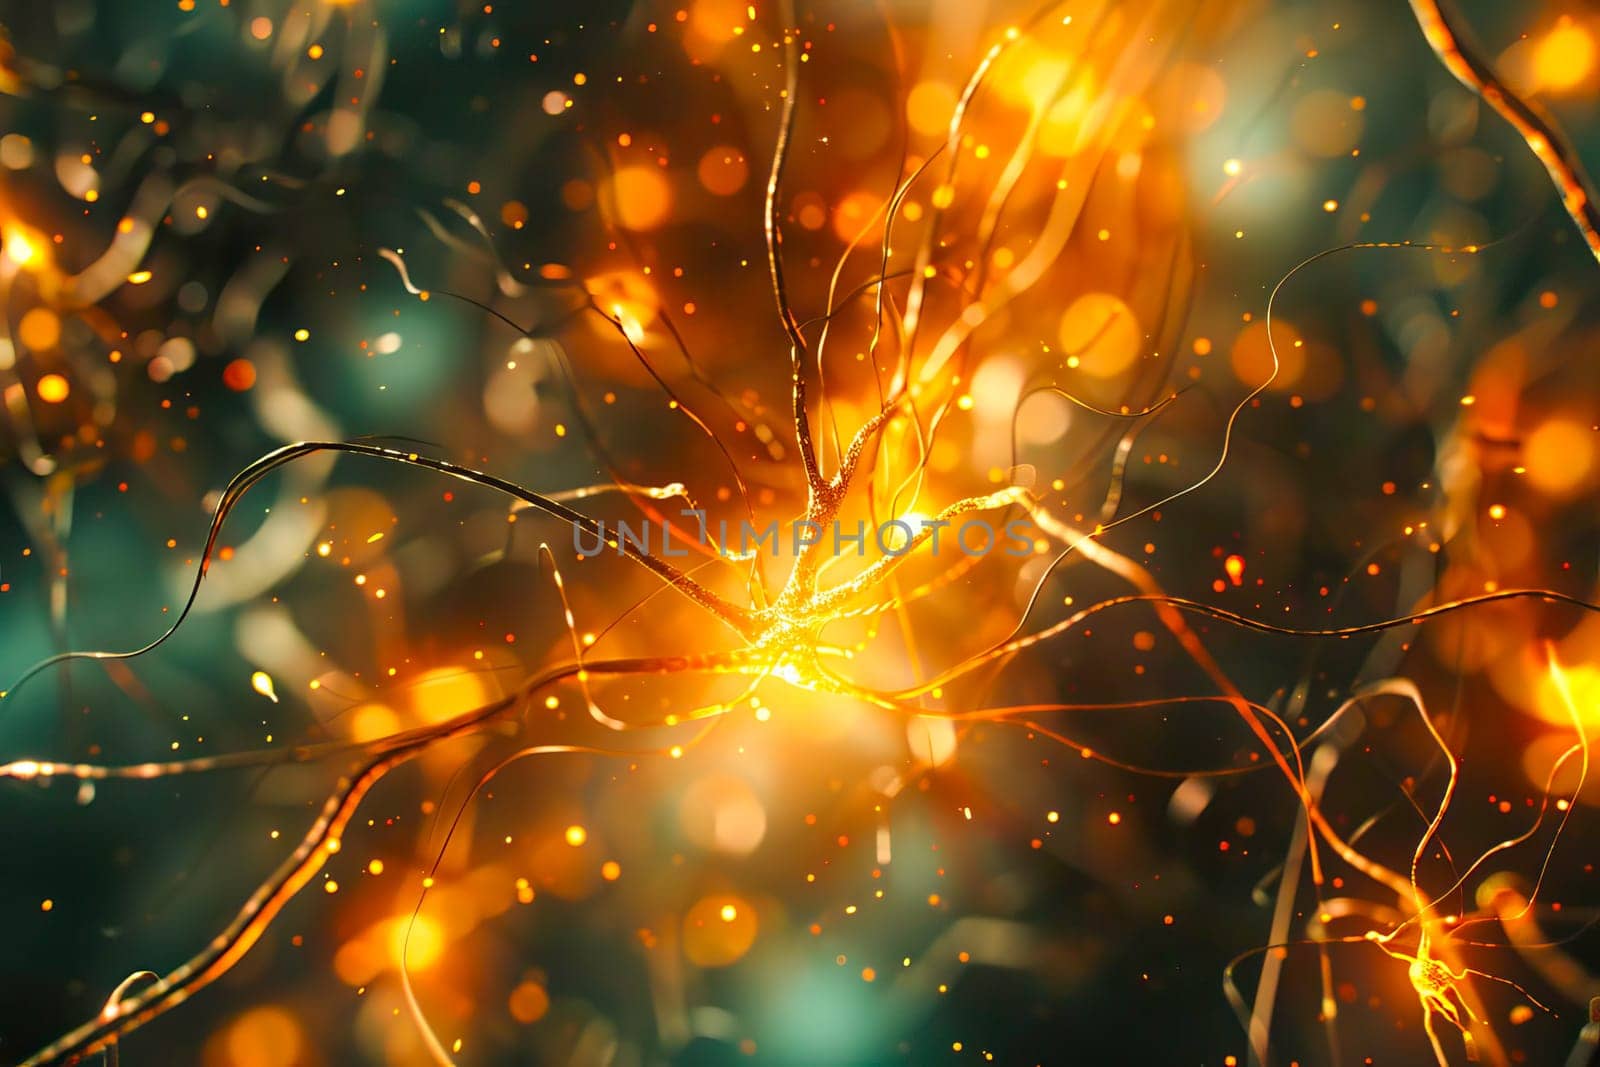 Neurons and synapses engage in electrical activity within the brain by vladimka